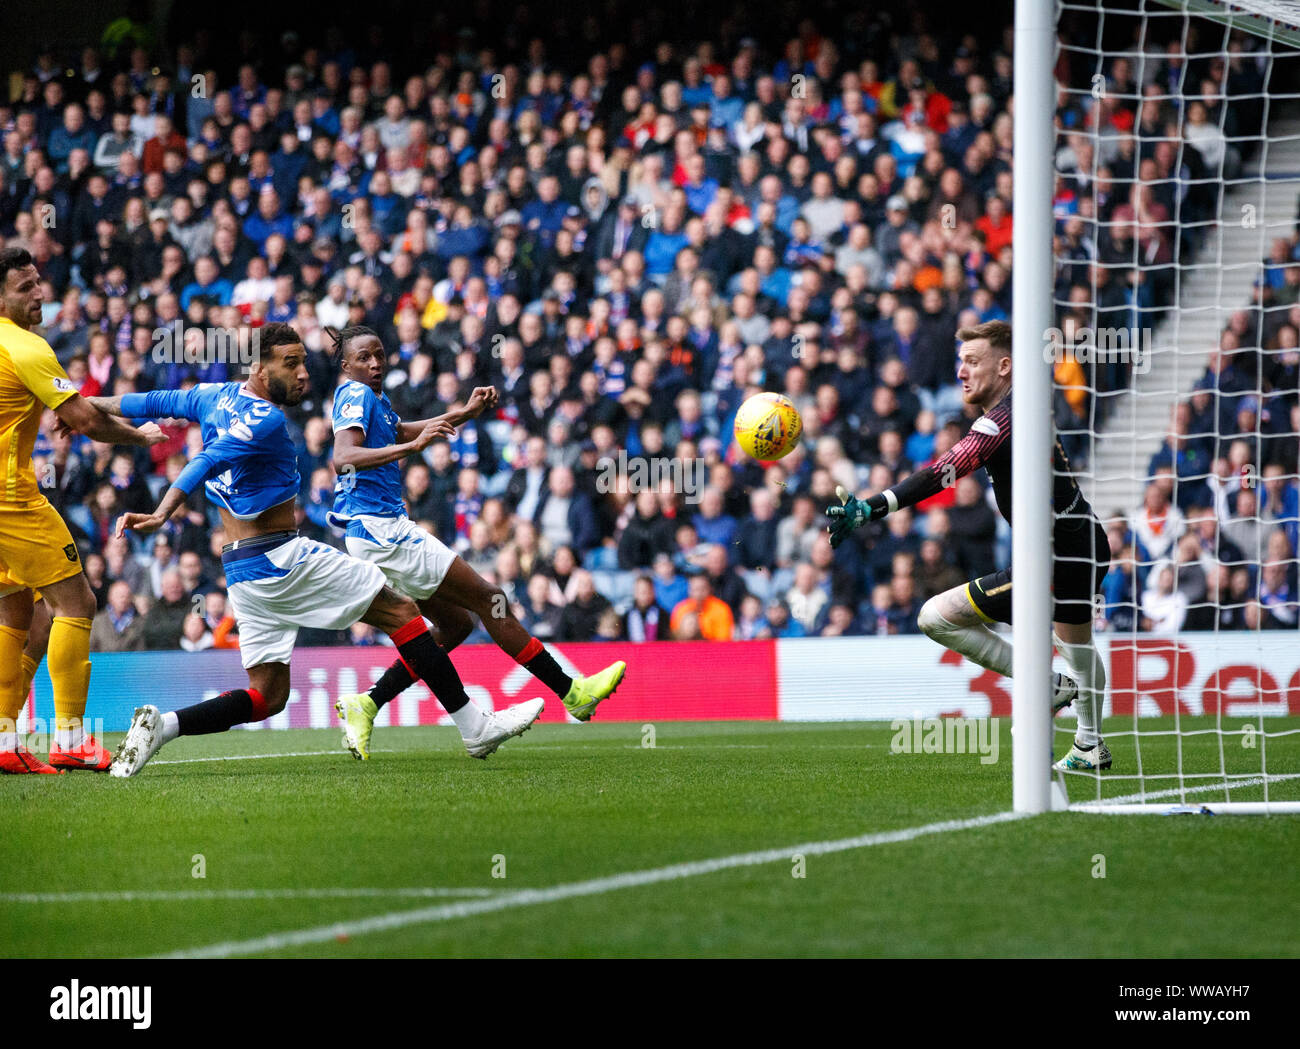 James Tavernier of Rangers (out of picture) scores from a free-kick beating everyone, including keeper Ross Stewart of Livingston during the Ladbrokes Scottish Premiership match at Ibrox, Glasgow. Stock Photo